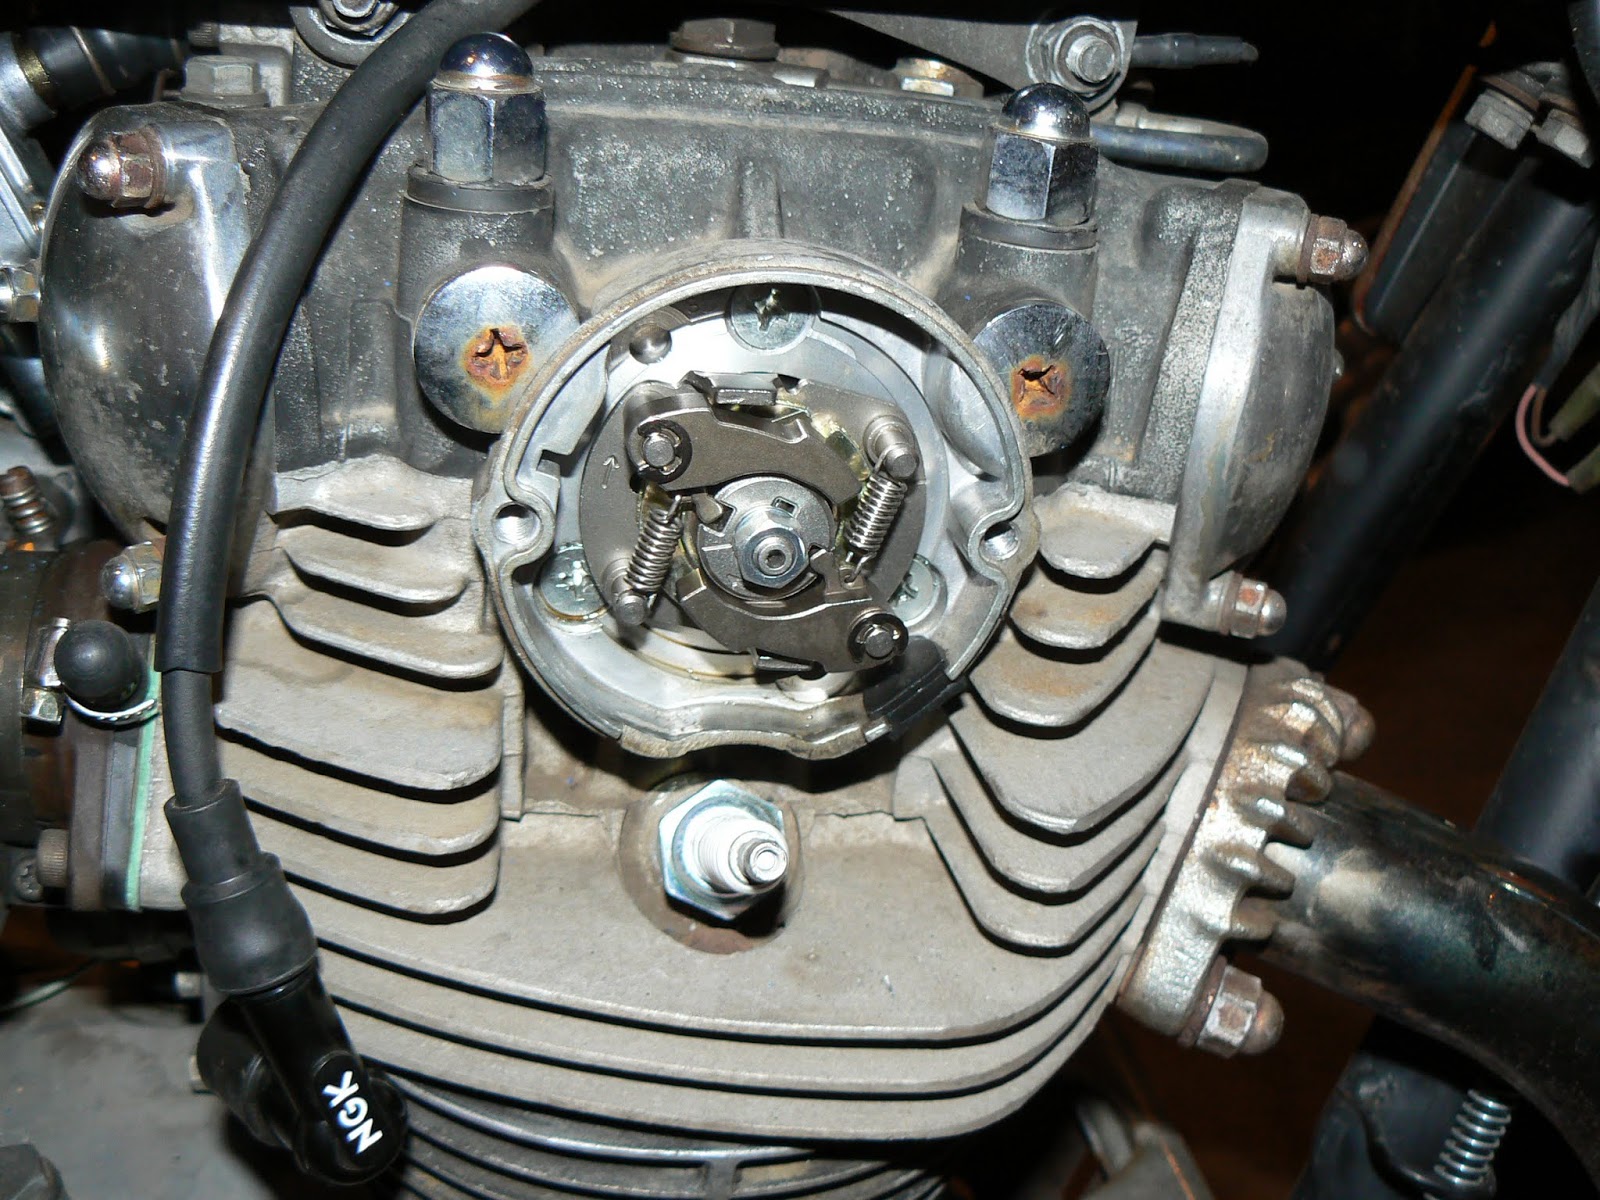 Ignition system - XS650 Repair